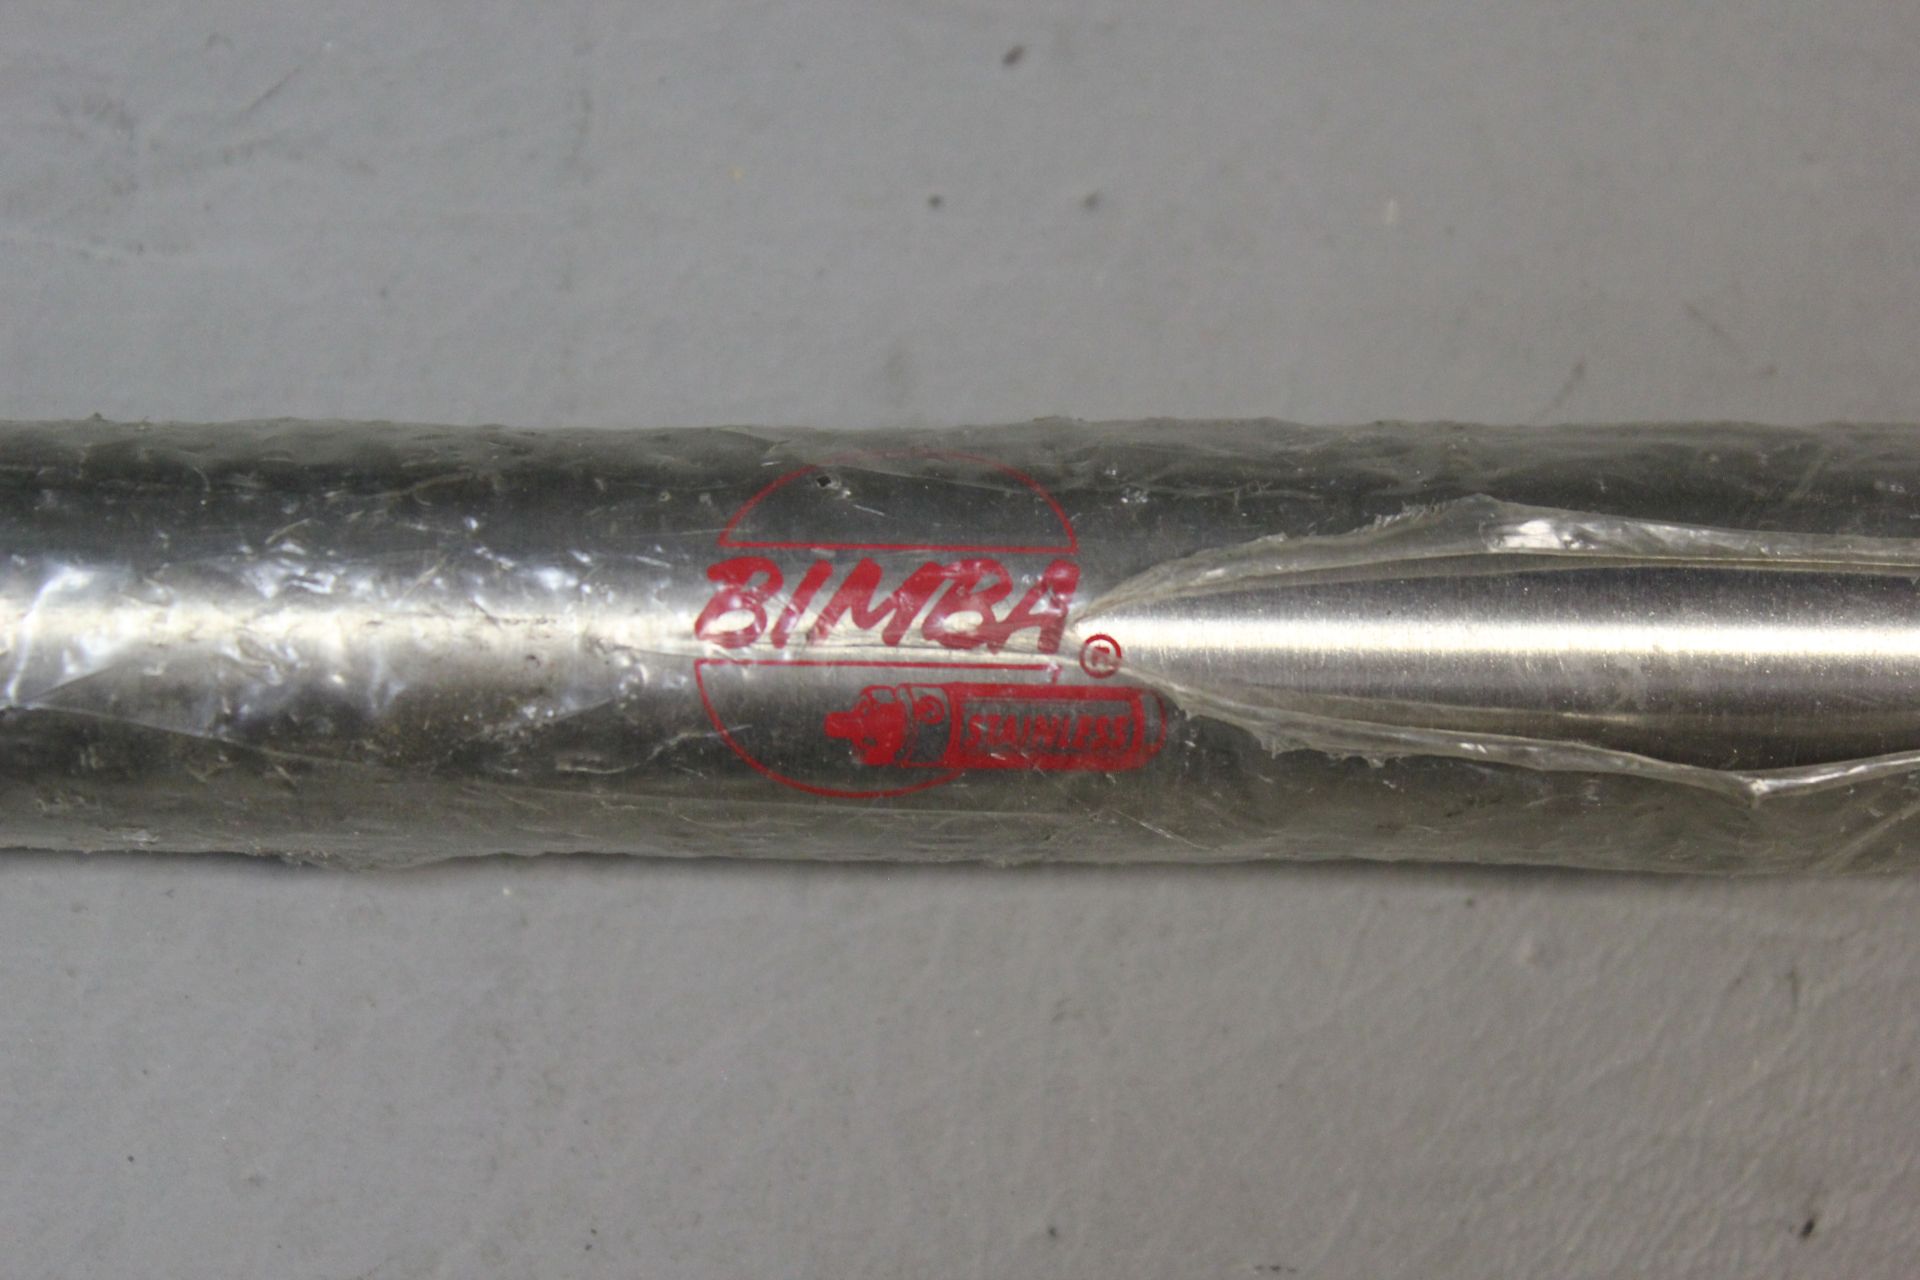 NEW BIMBA PNEUMATIC STAINLESS STEEL ROD CYLINDER - Image 2 of 5